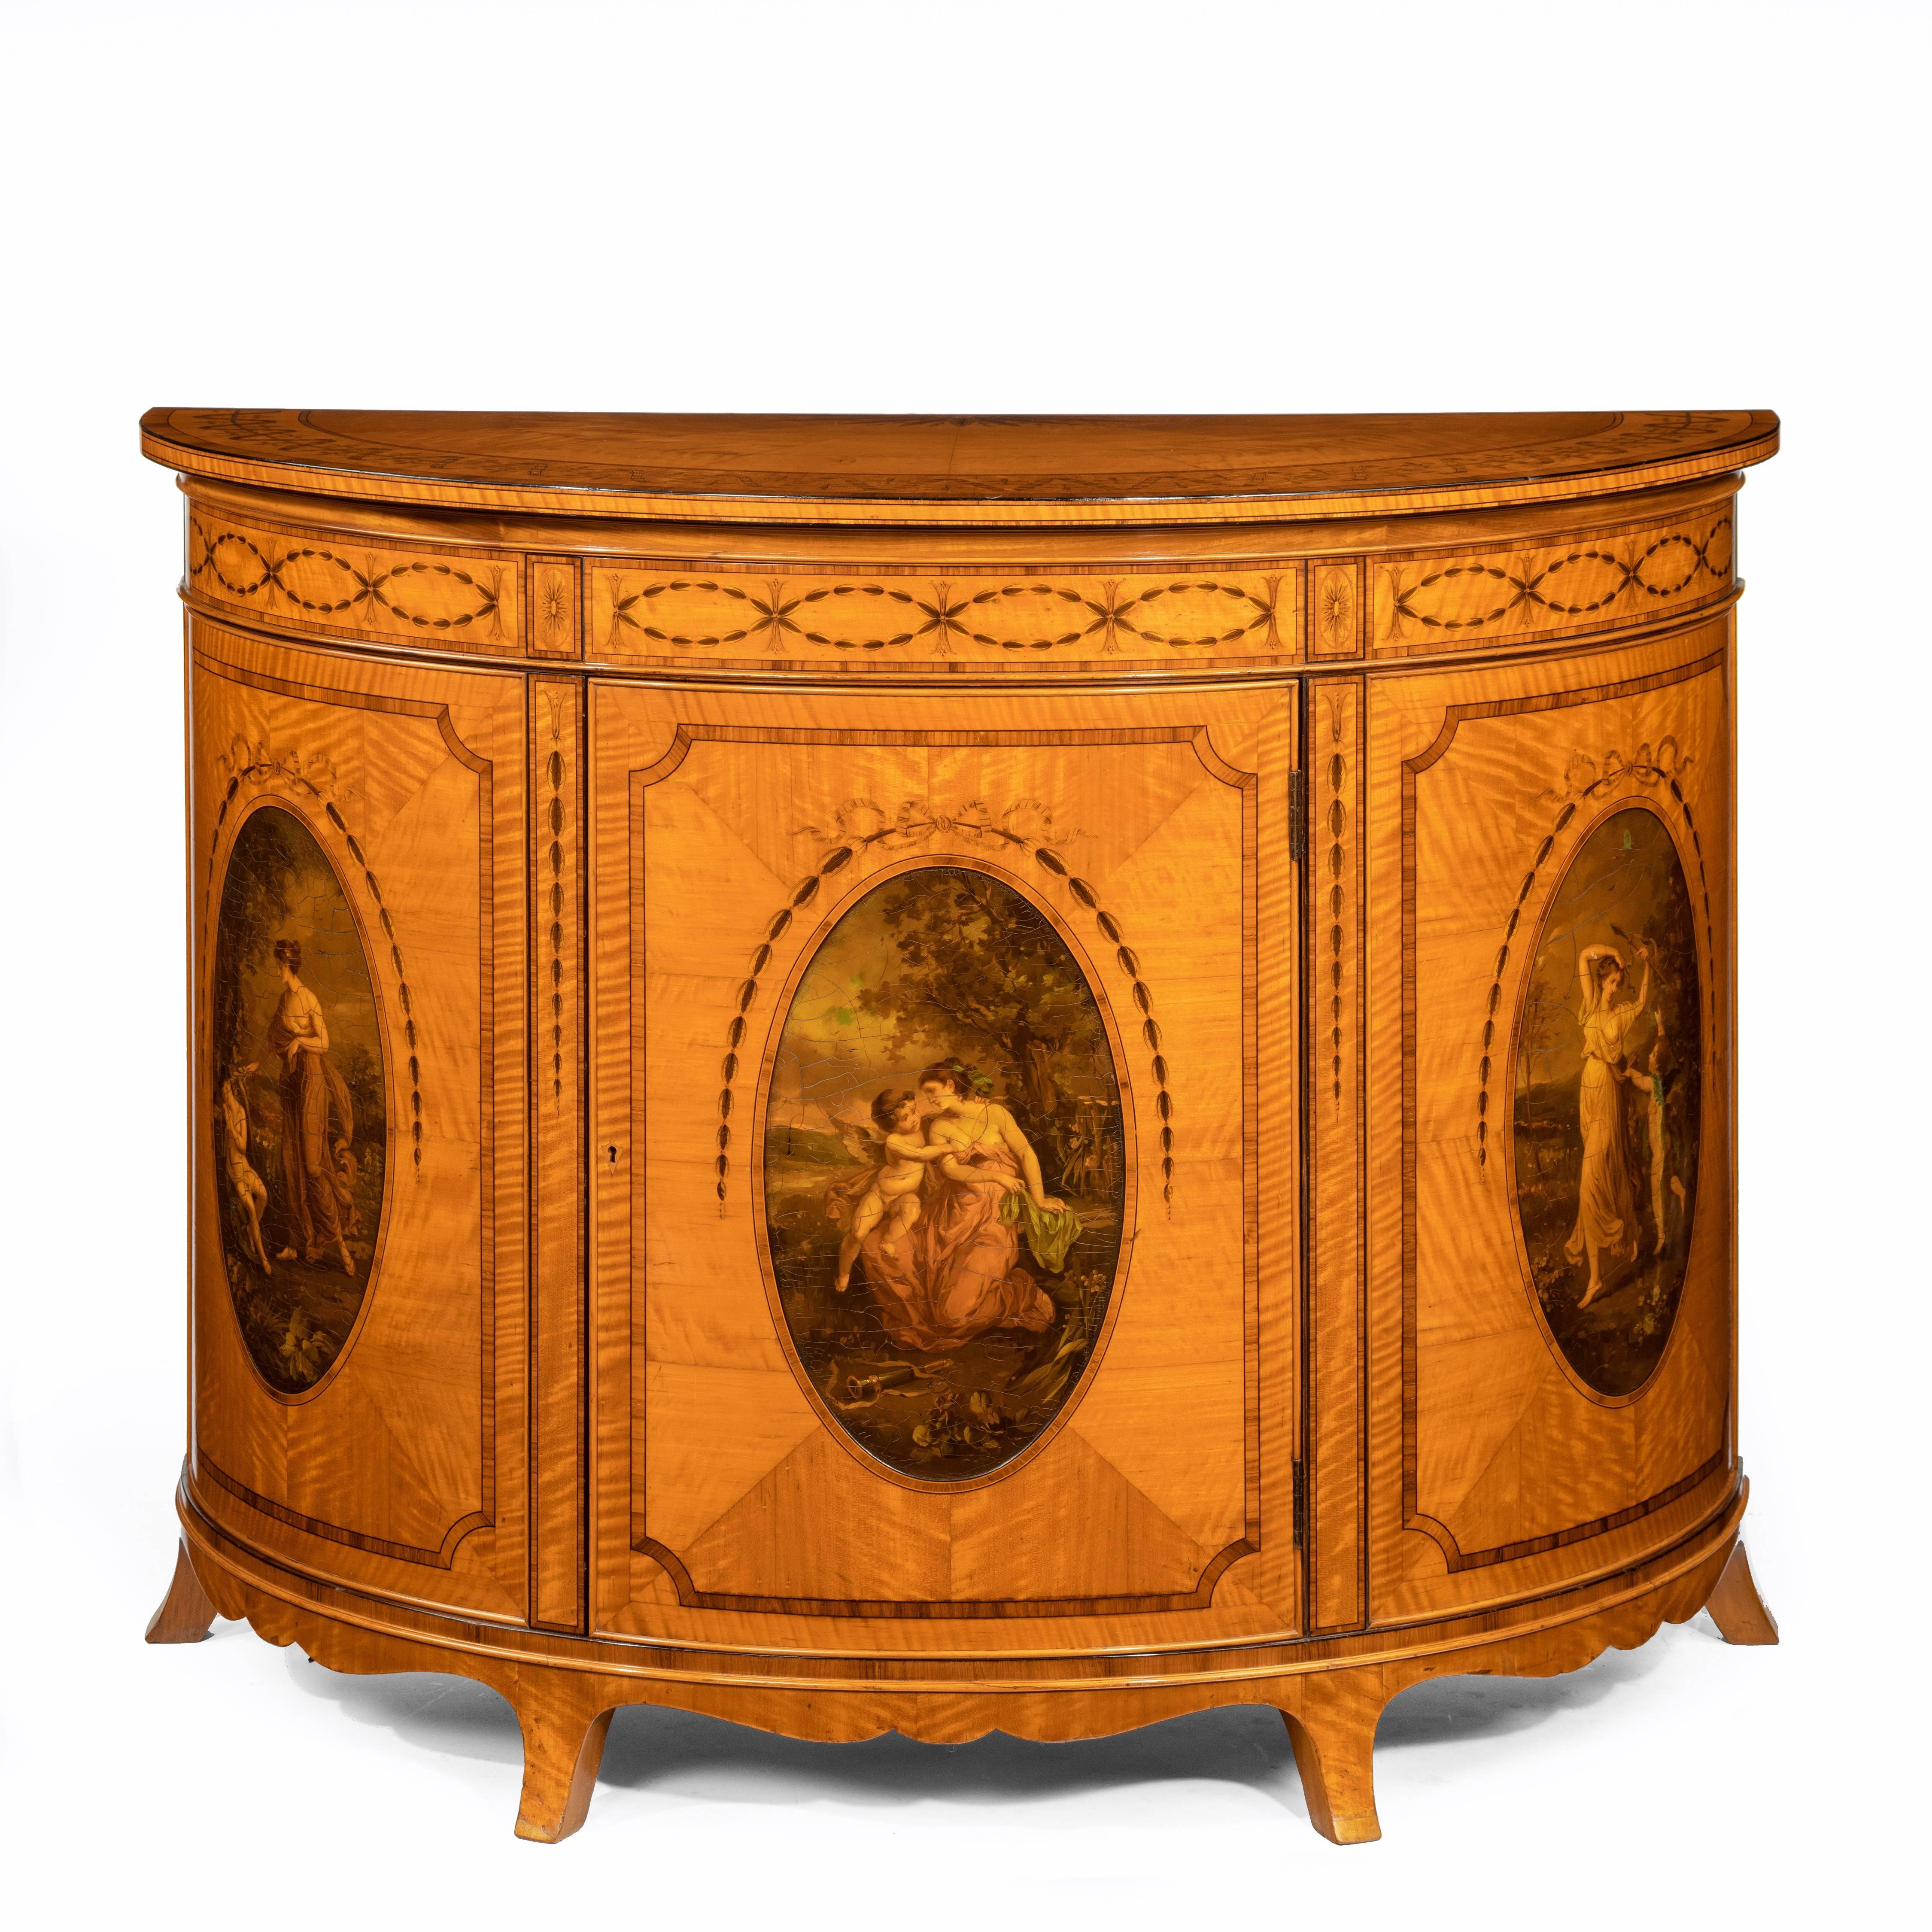 A fine Victorian Sheraton revival West Indian satinwood demi lune commode, the semi-circular top above three panels, the central one disguising a cupboard door, painted with three ovals in the style of Angelica Kaufman with classical scenes of Venus